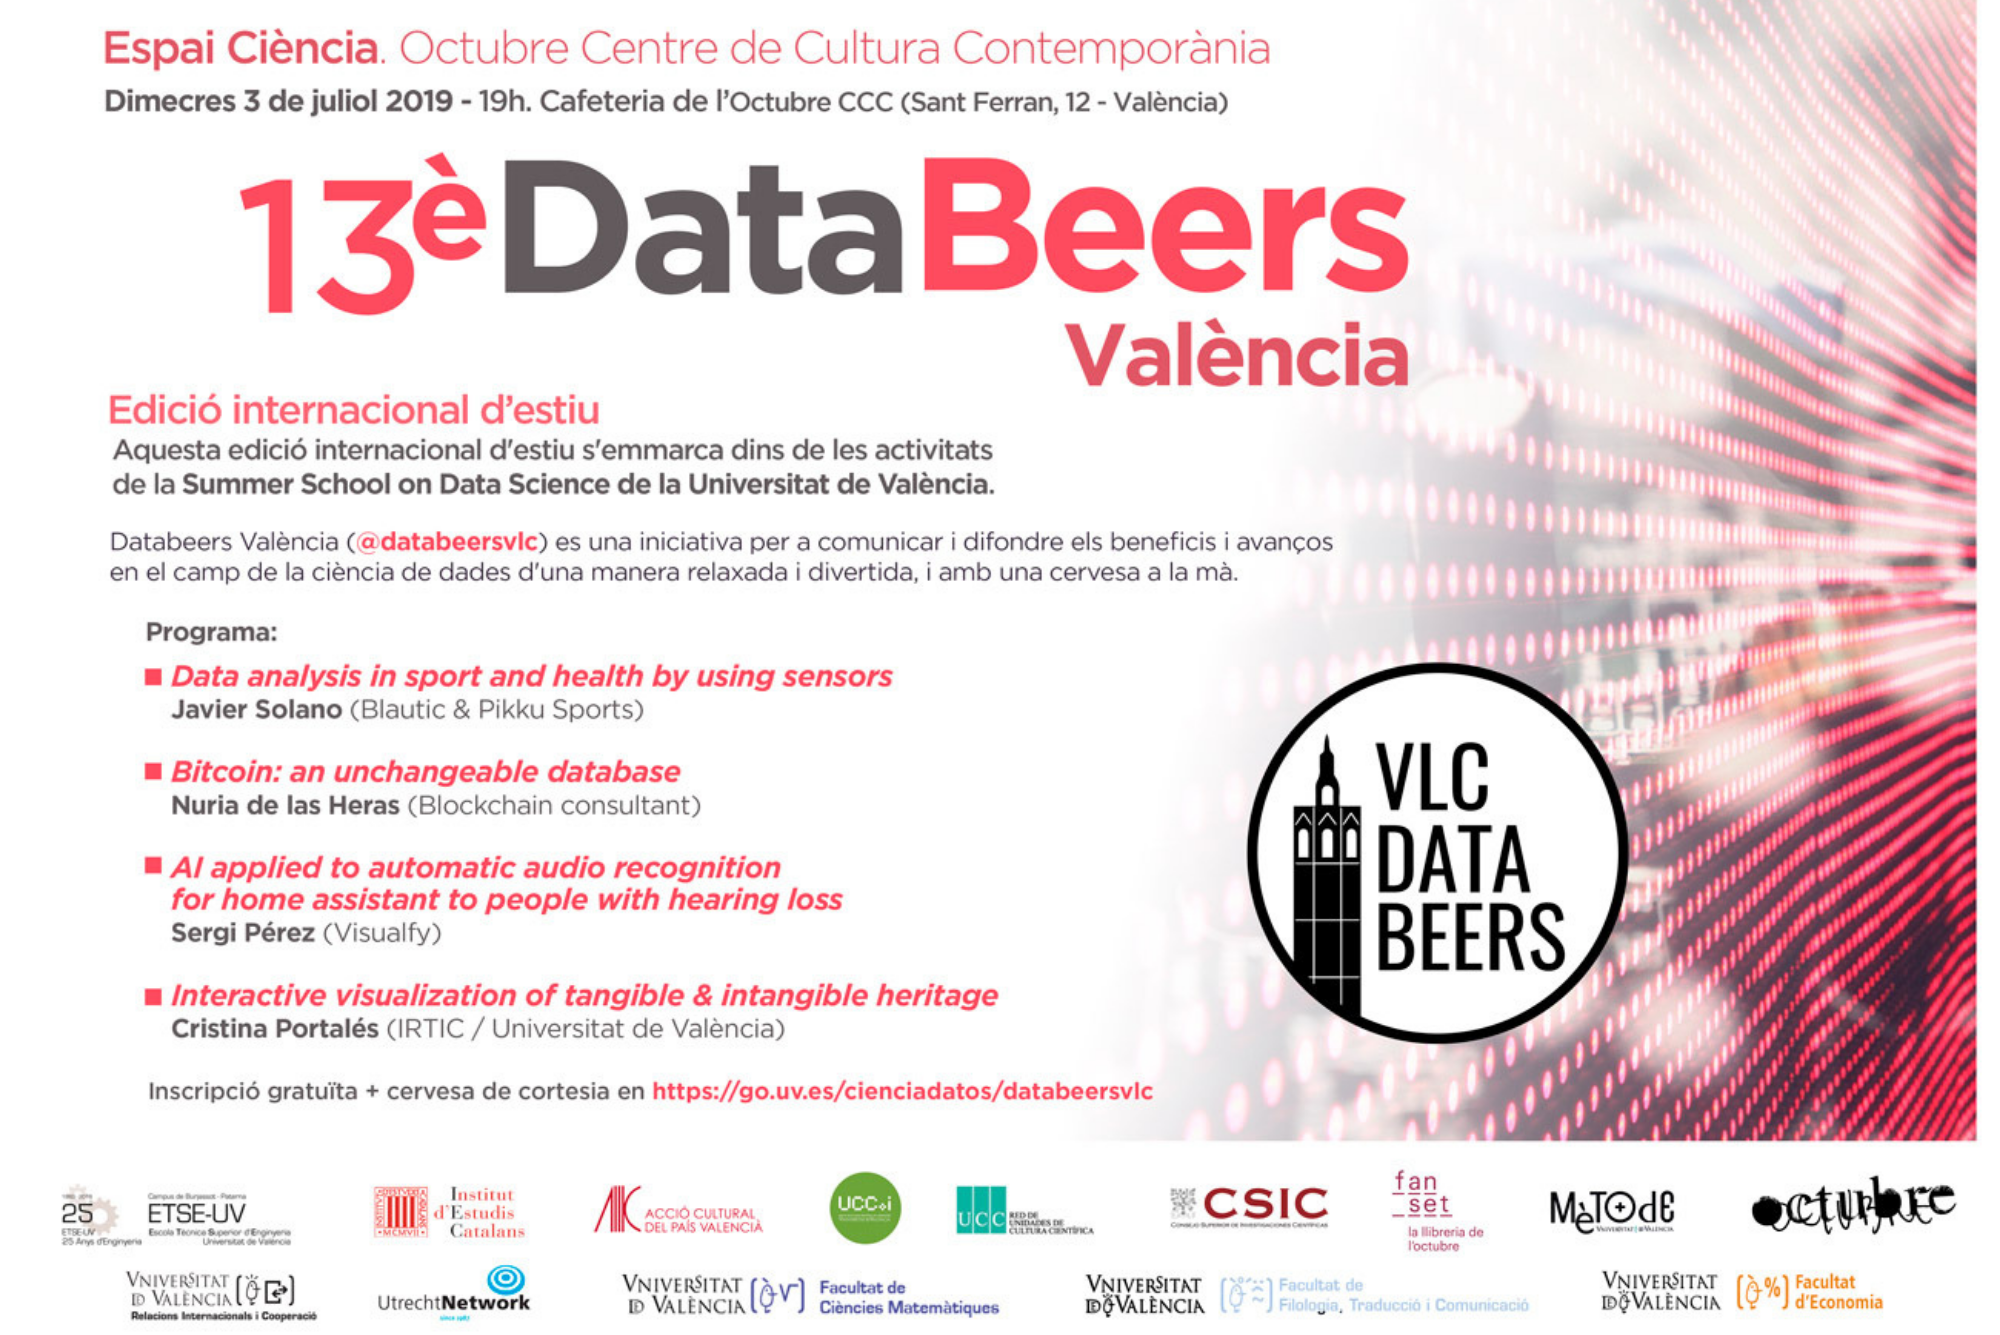 Data Beers València organises its 13th edition in the II Summer School on Data Science of the UV